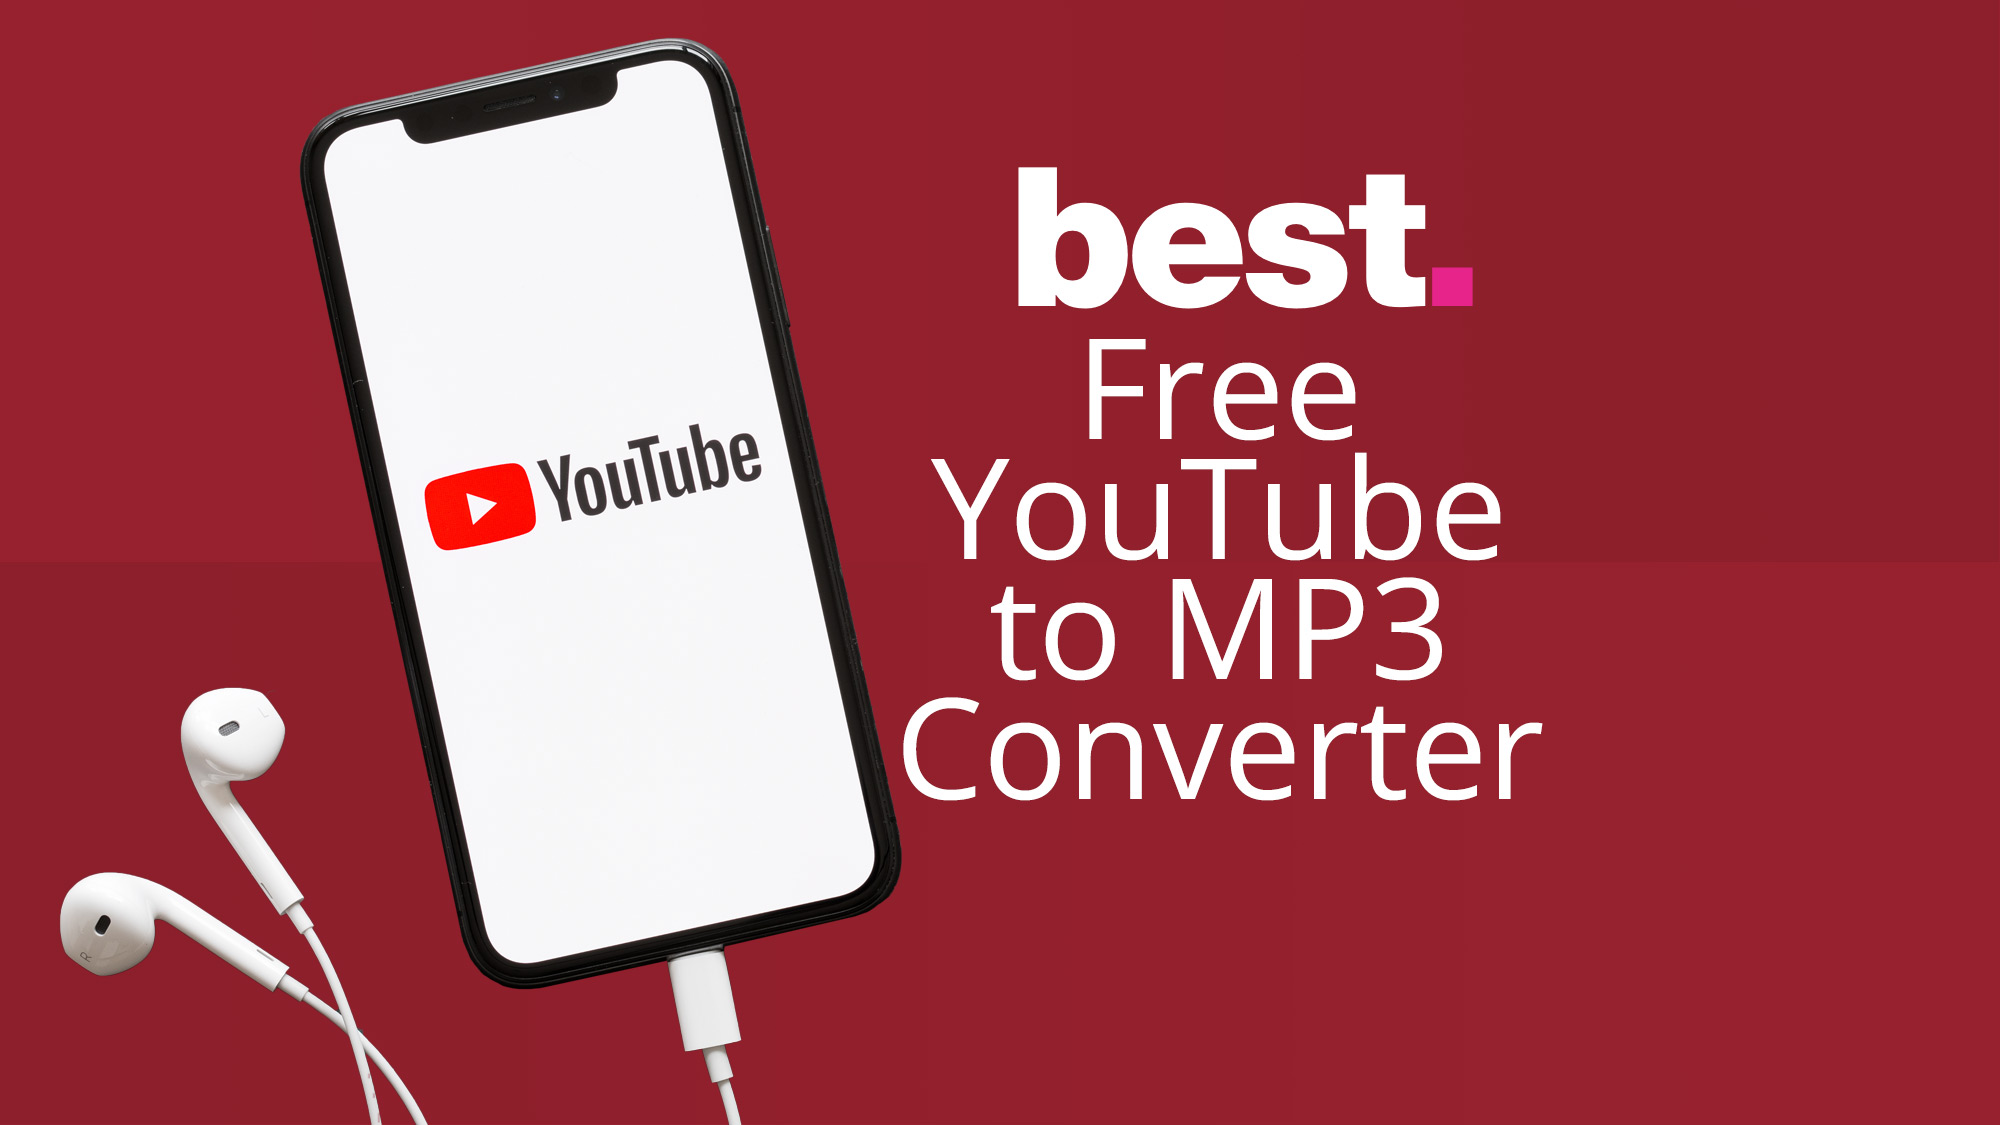 best youtube to mp3 converter download